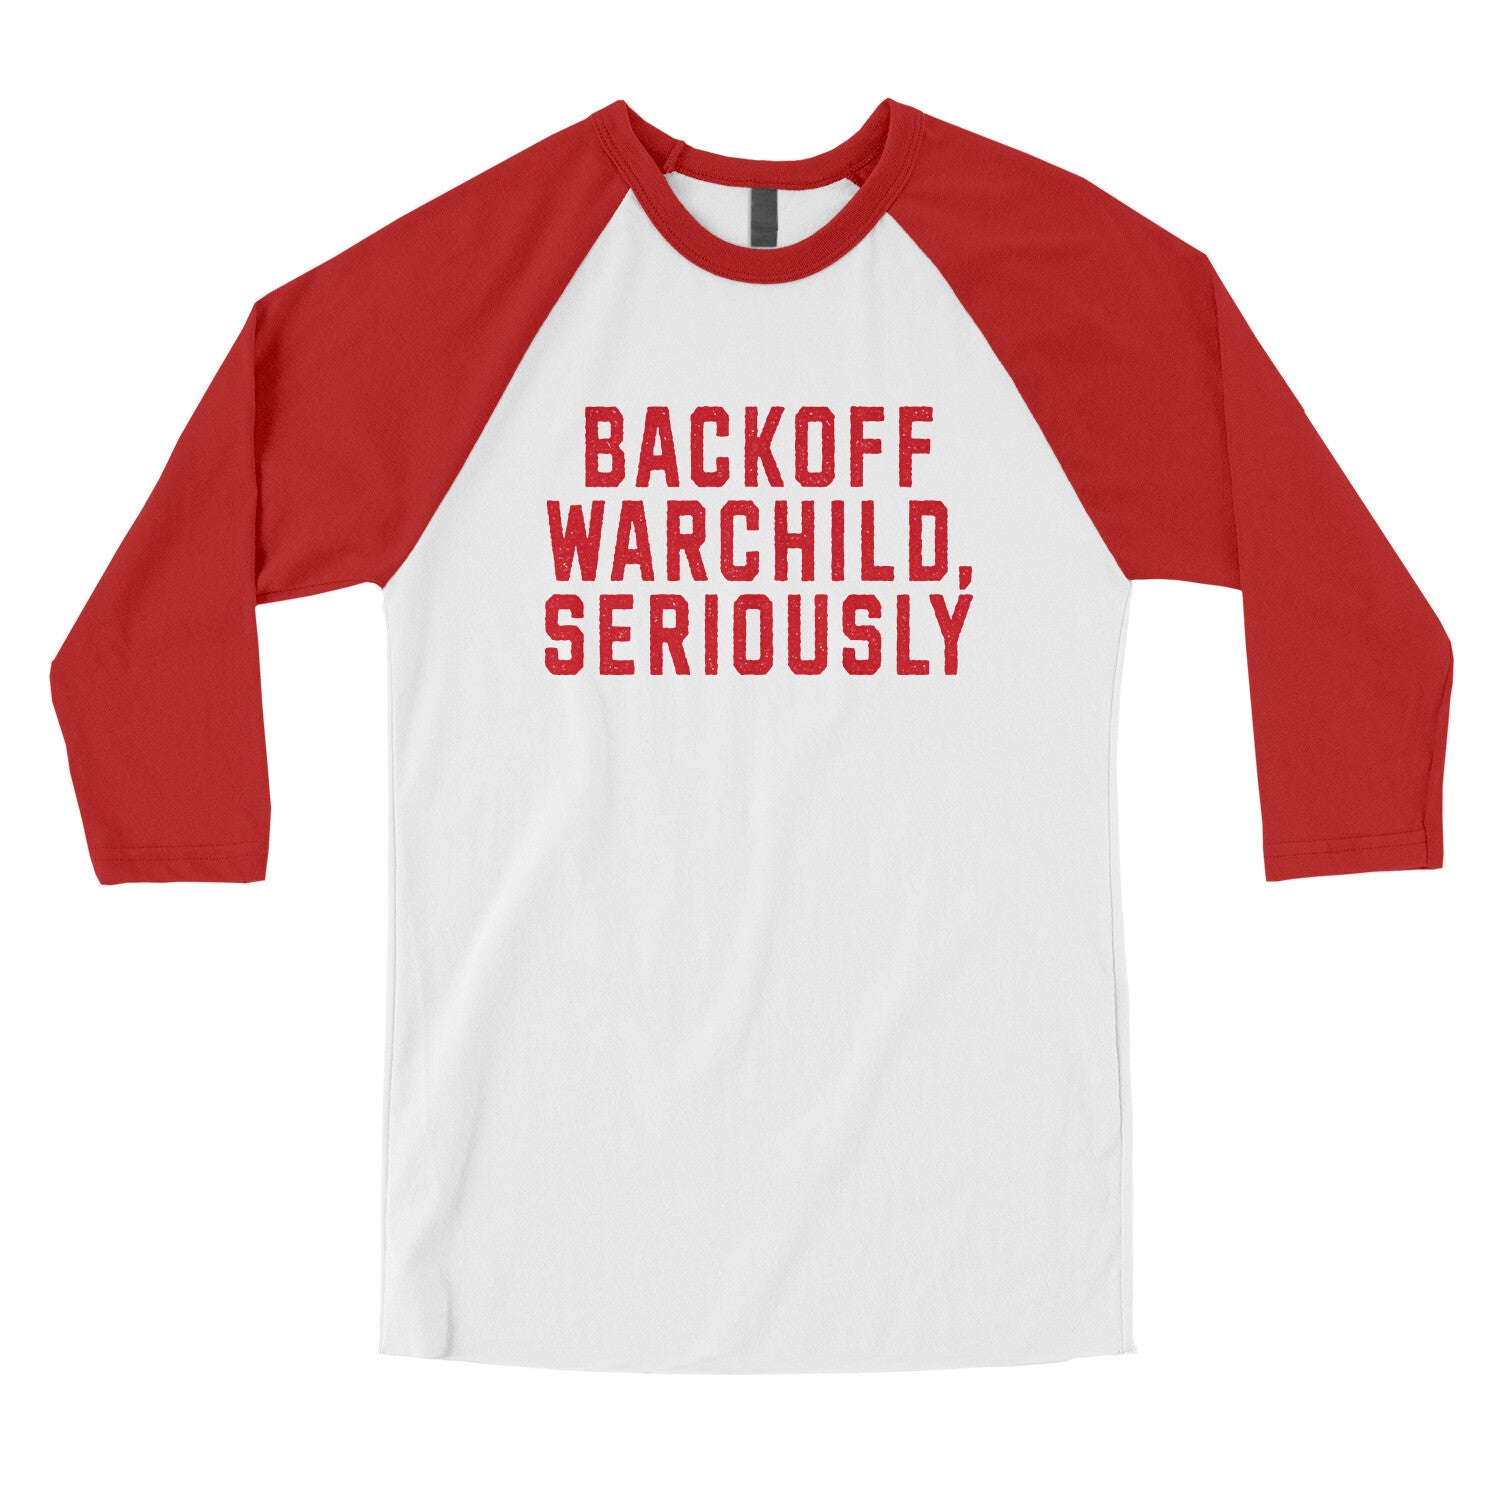 Backoff Warchild Seriously in White with Red Color